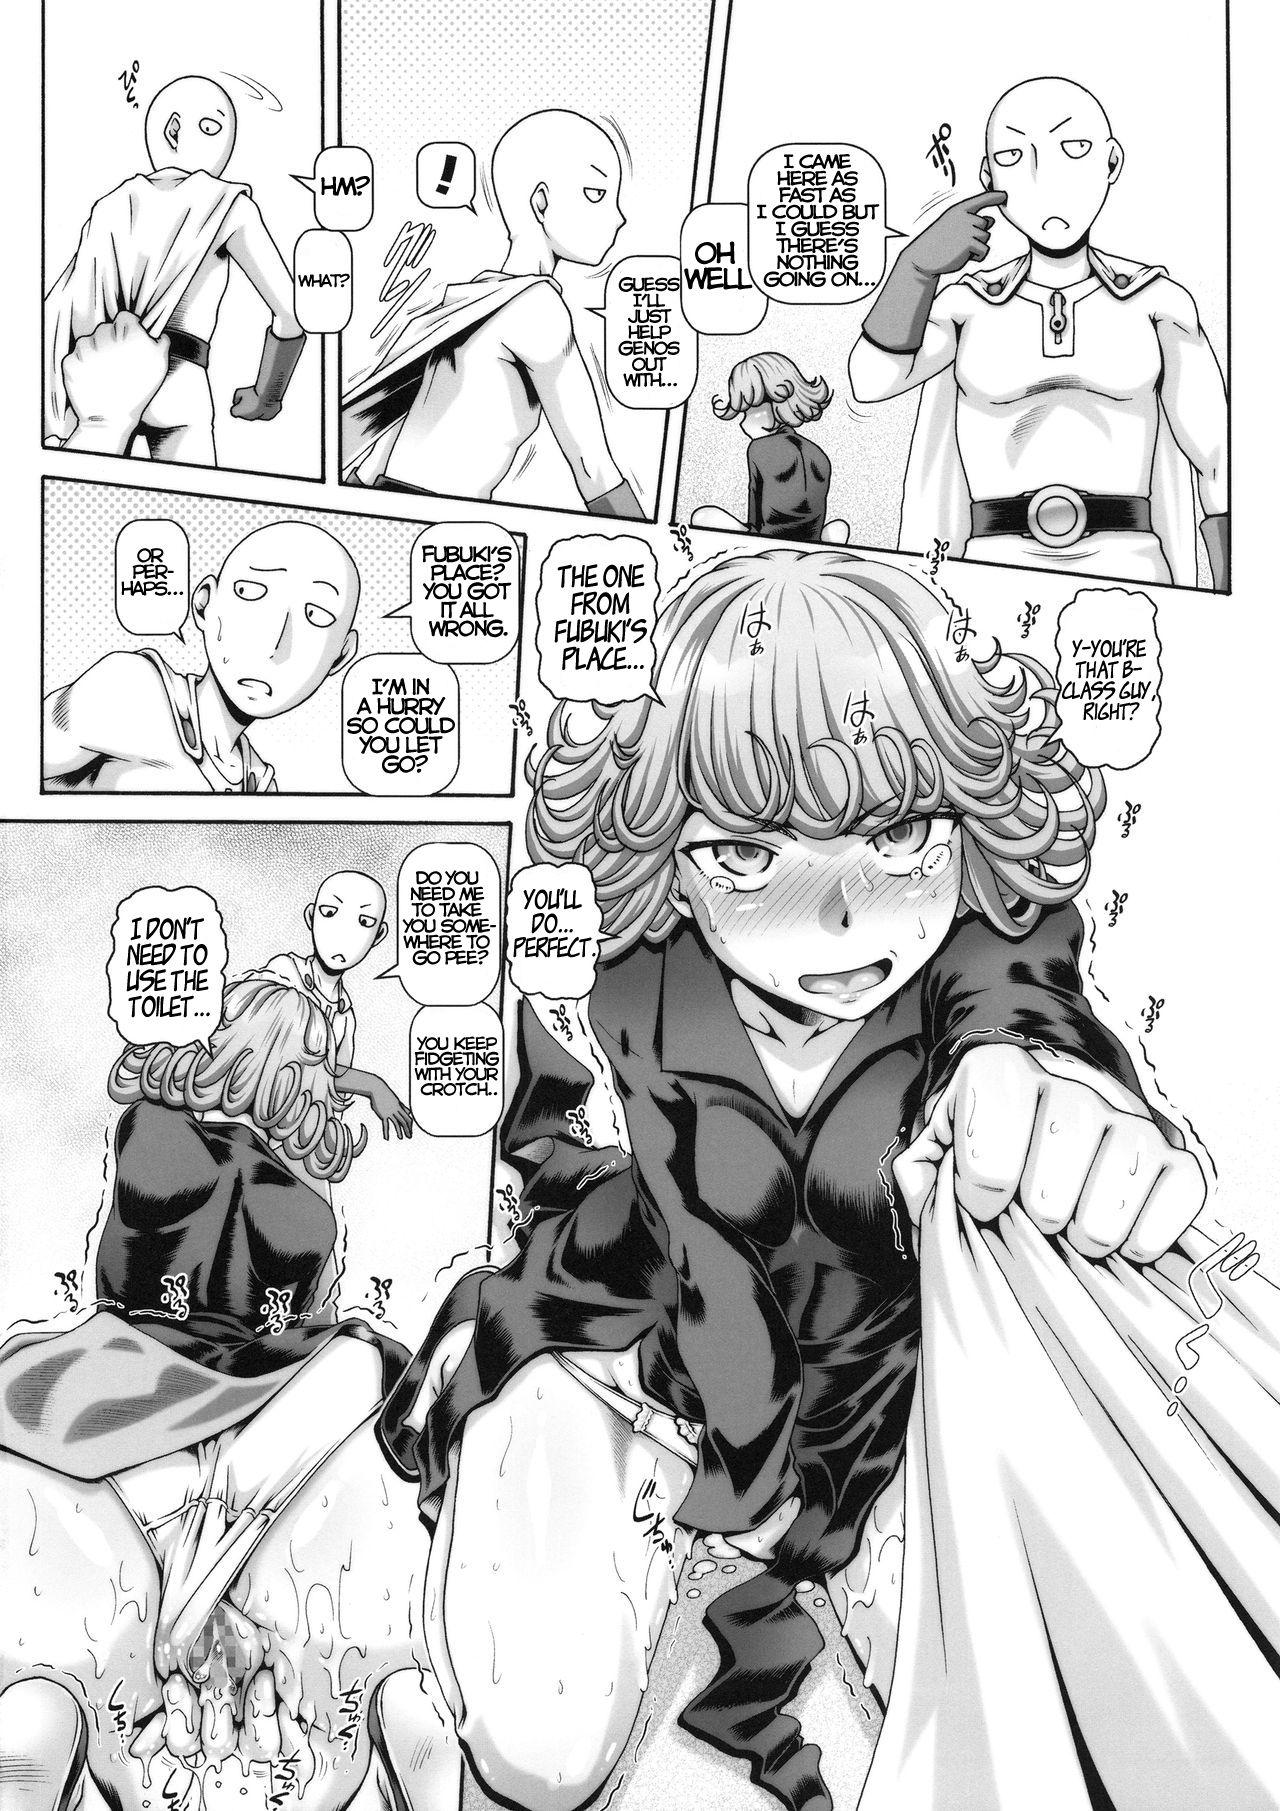 Gay Blowjob EMPIRE HARD CORE 2019 SUMMER - One punch man Siririca - Page 5